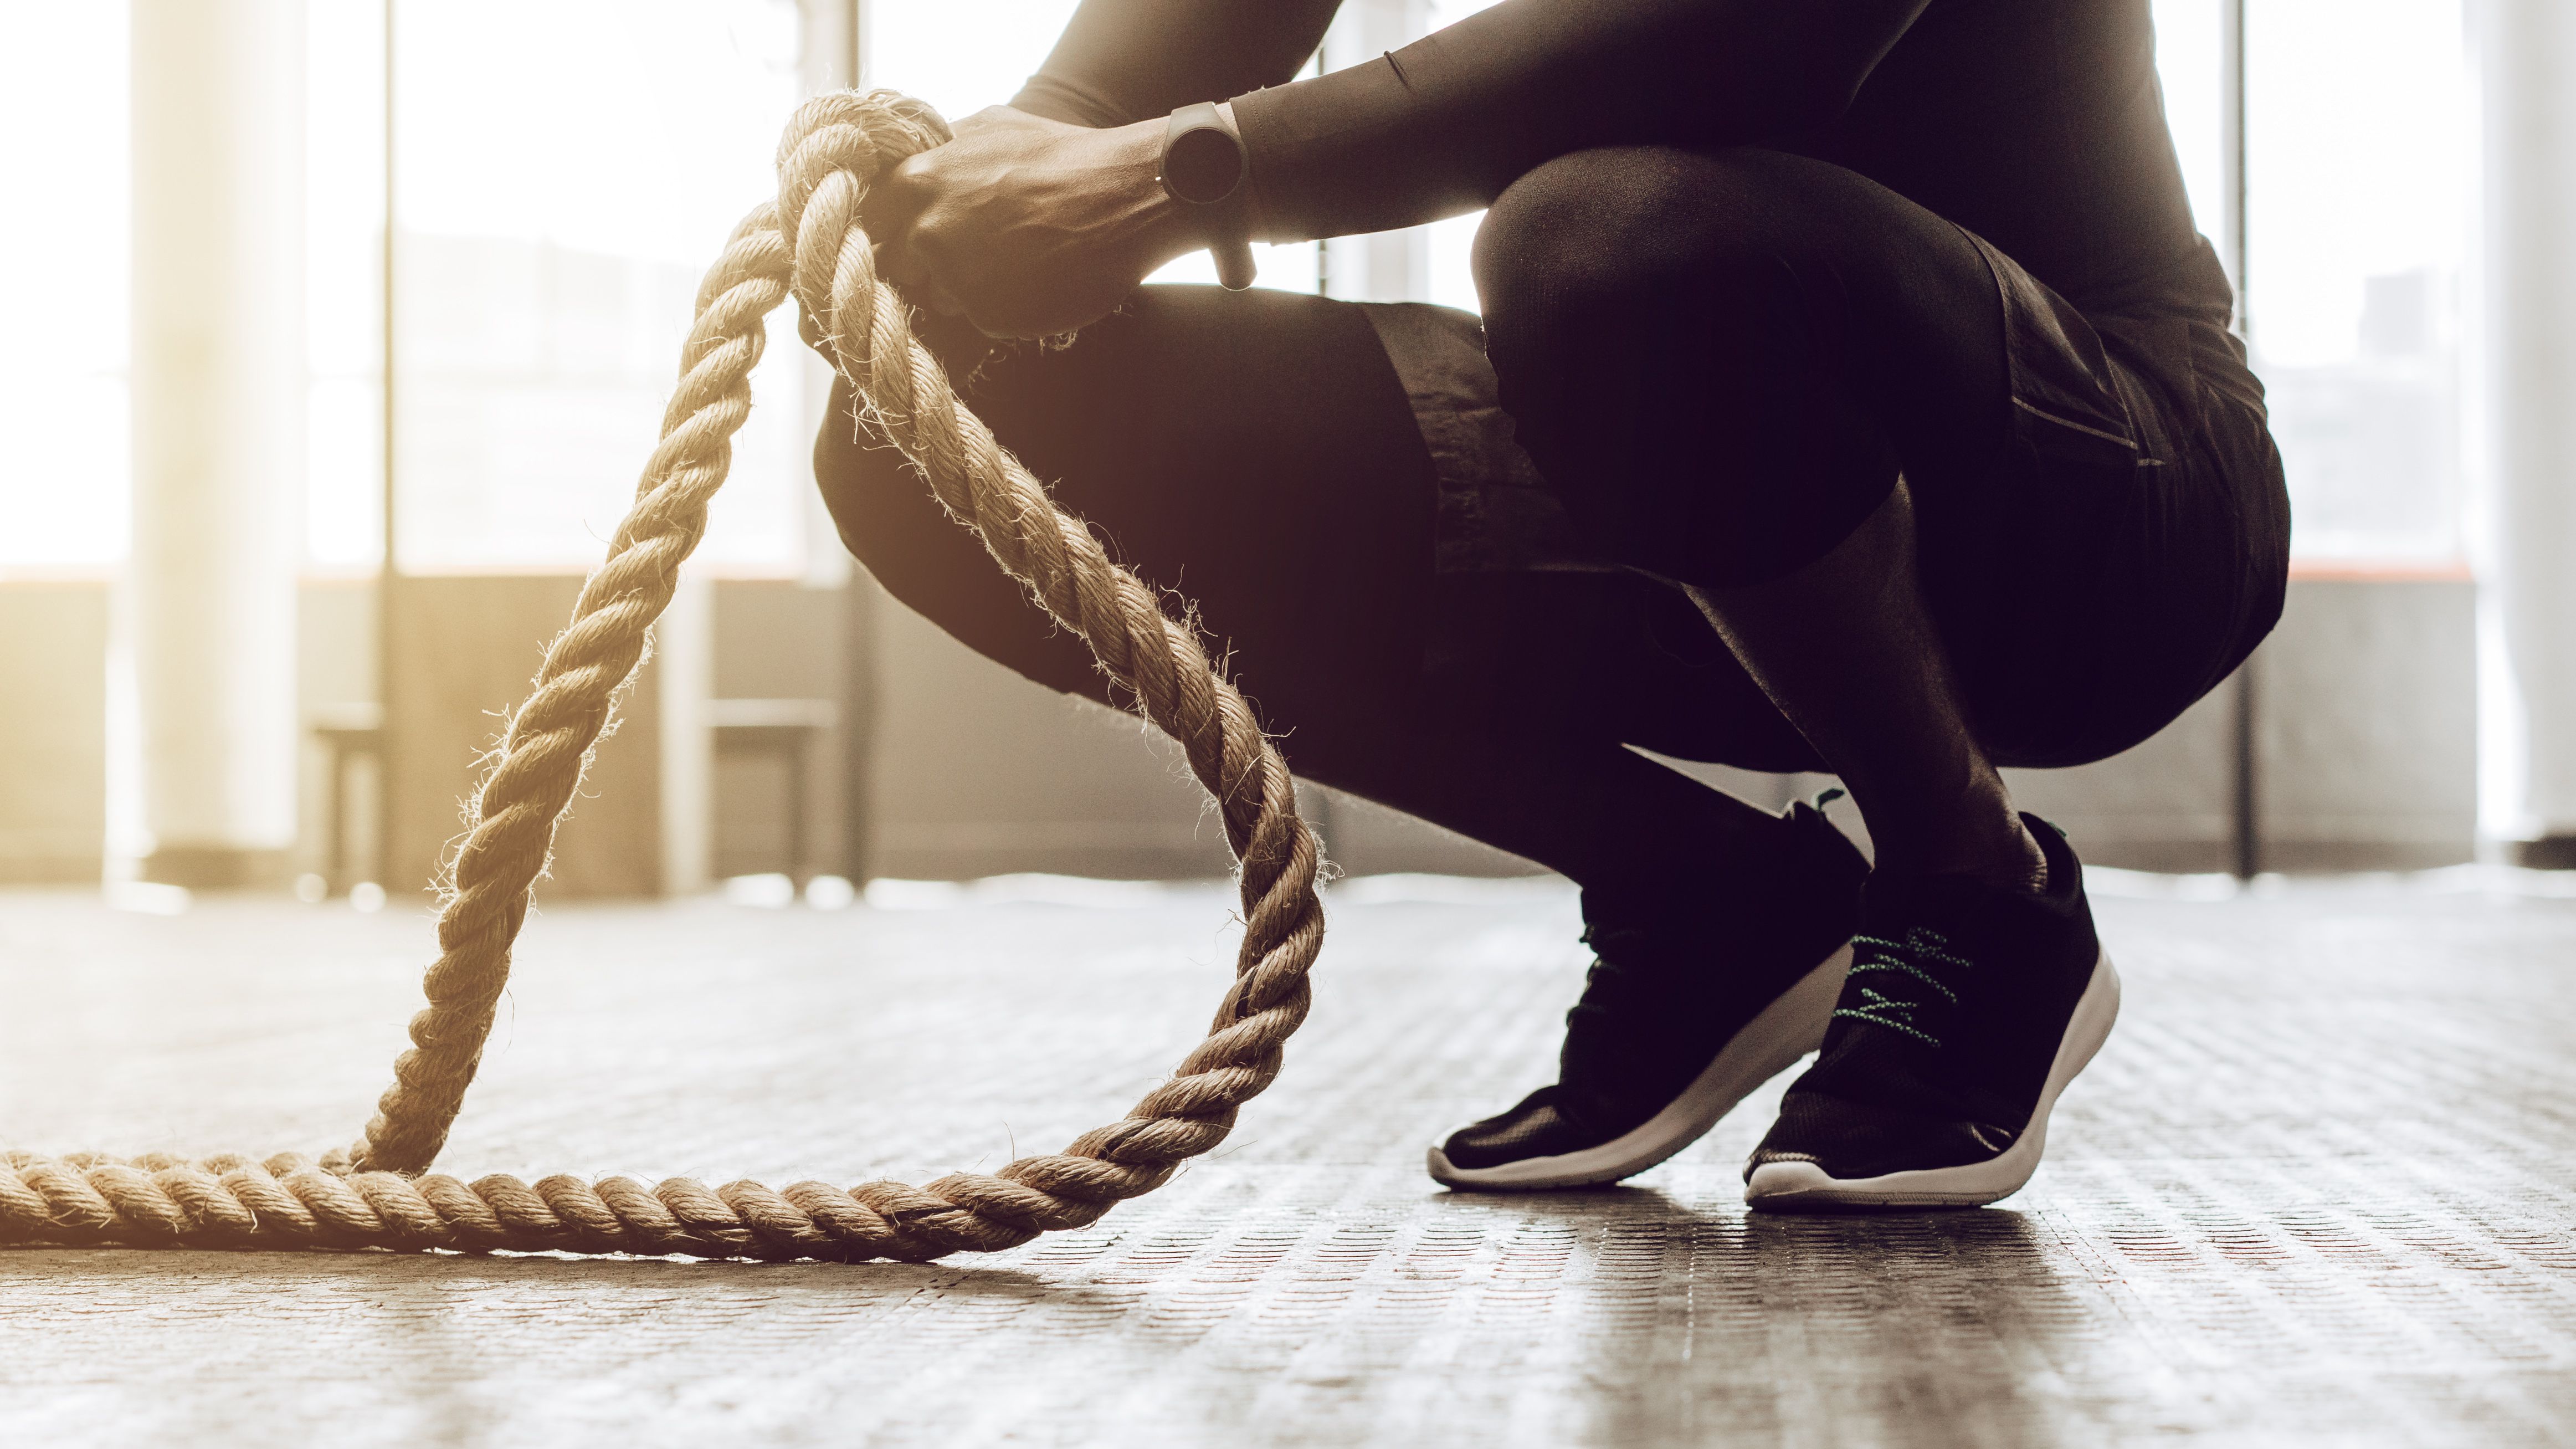 Battle Ropes Workout - Abs Workout With Battle Ropes